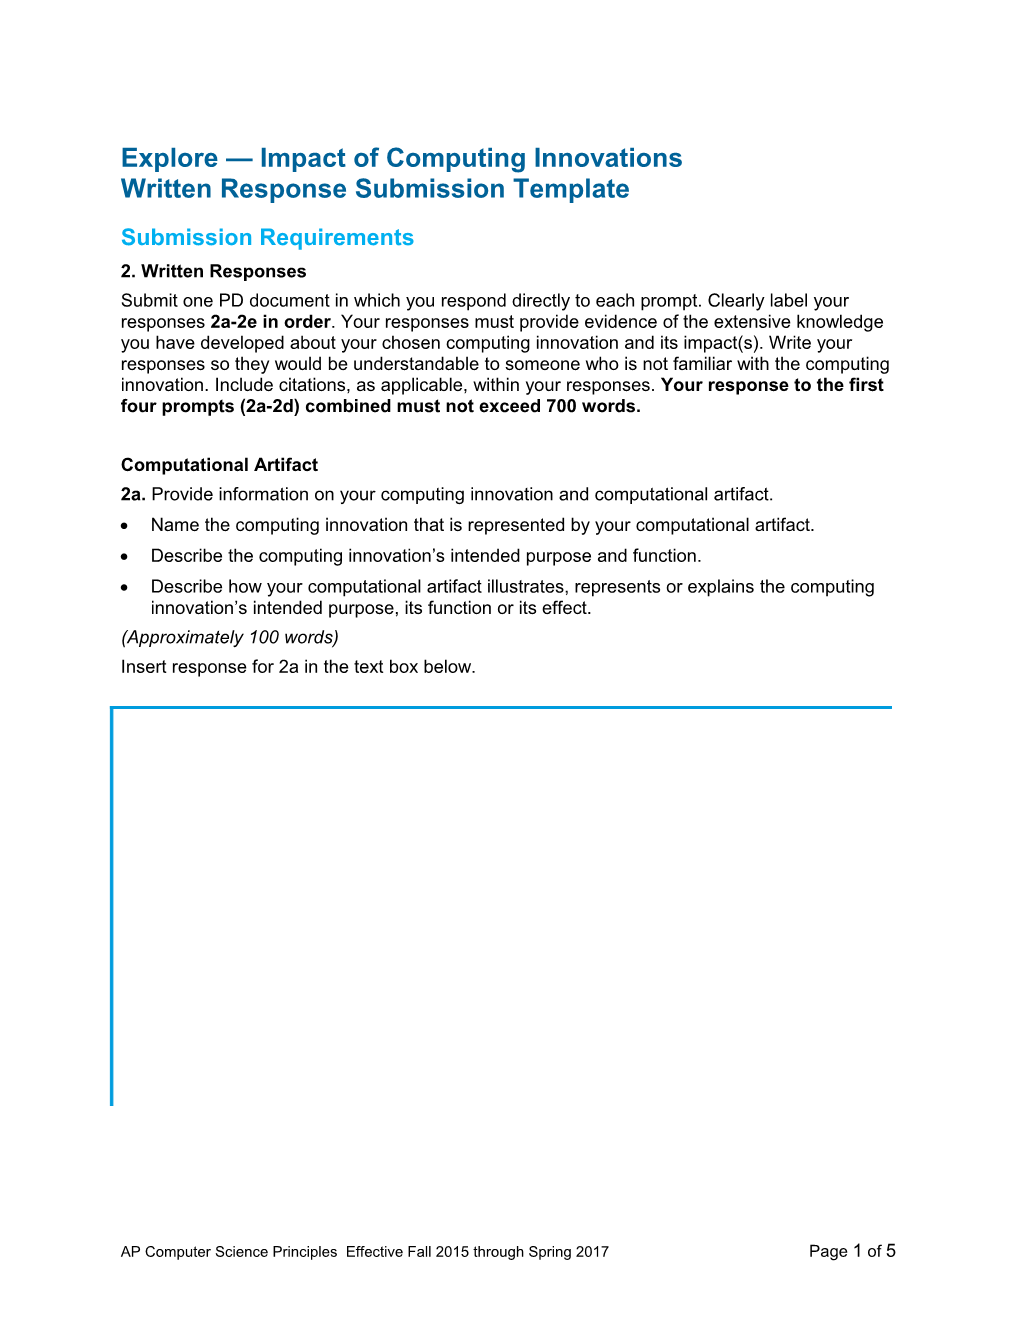 Explore Impact of Computing Innovations Written Response Submission Template